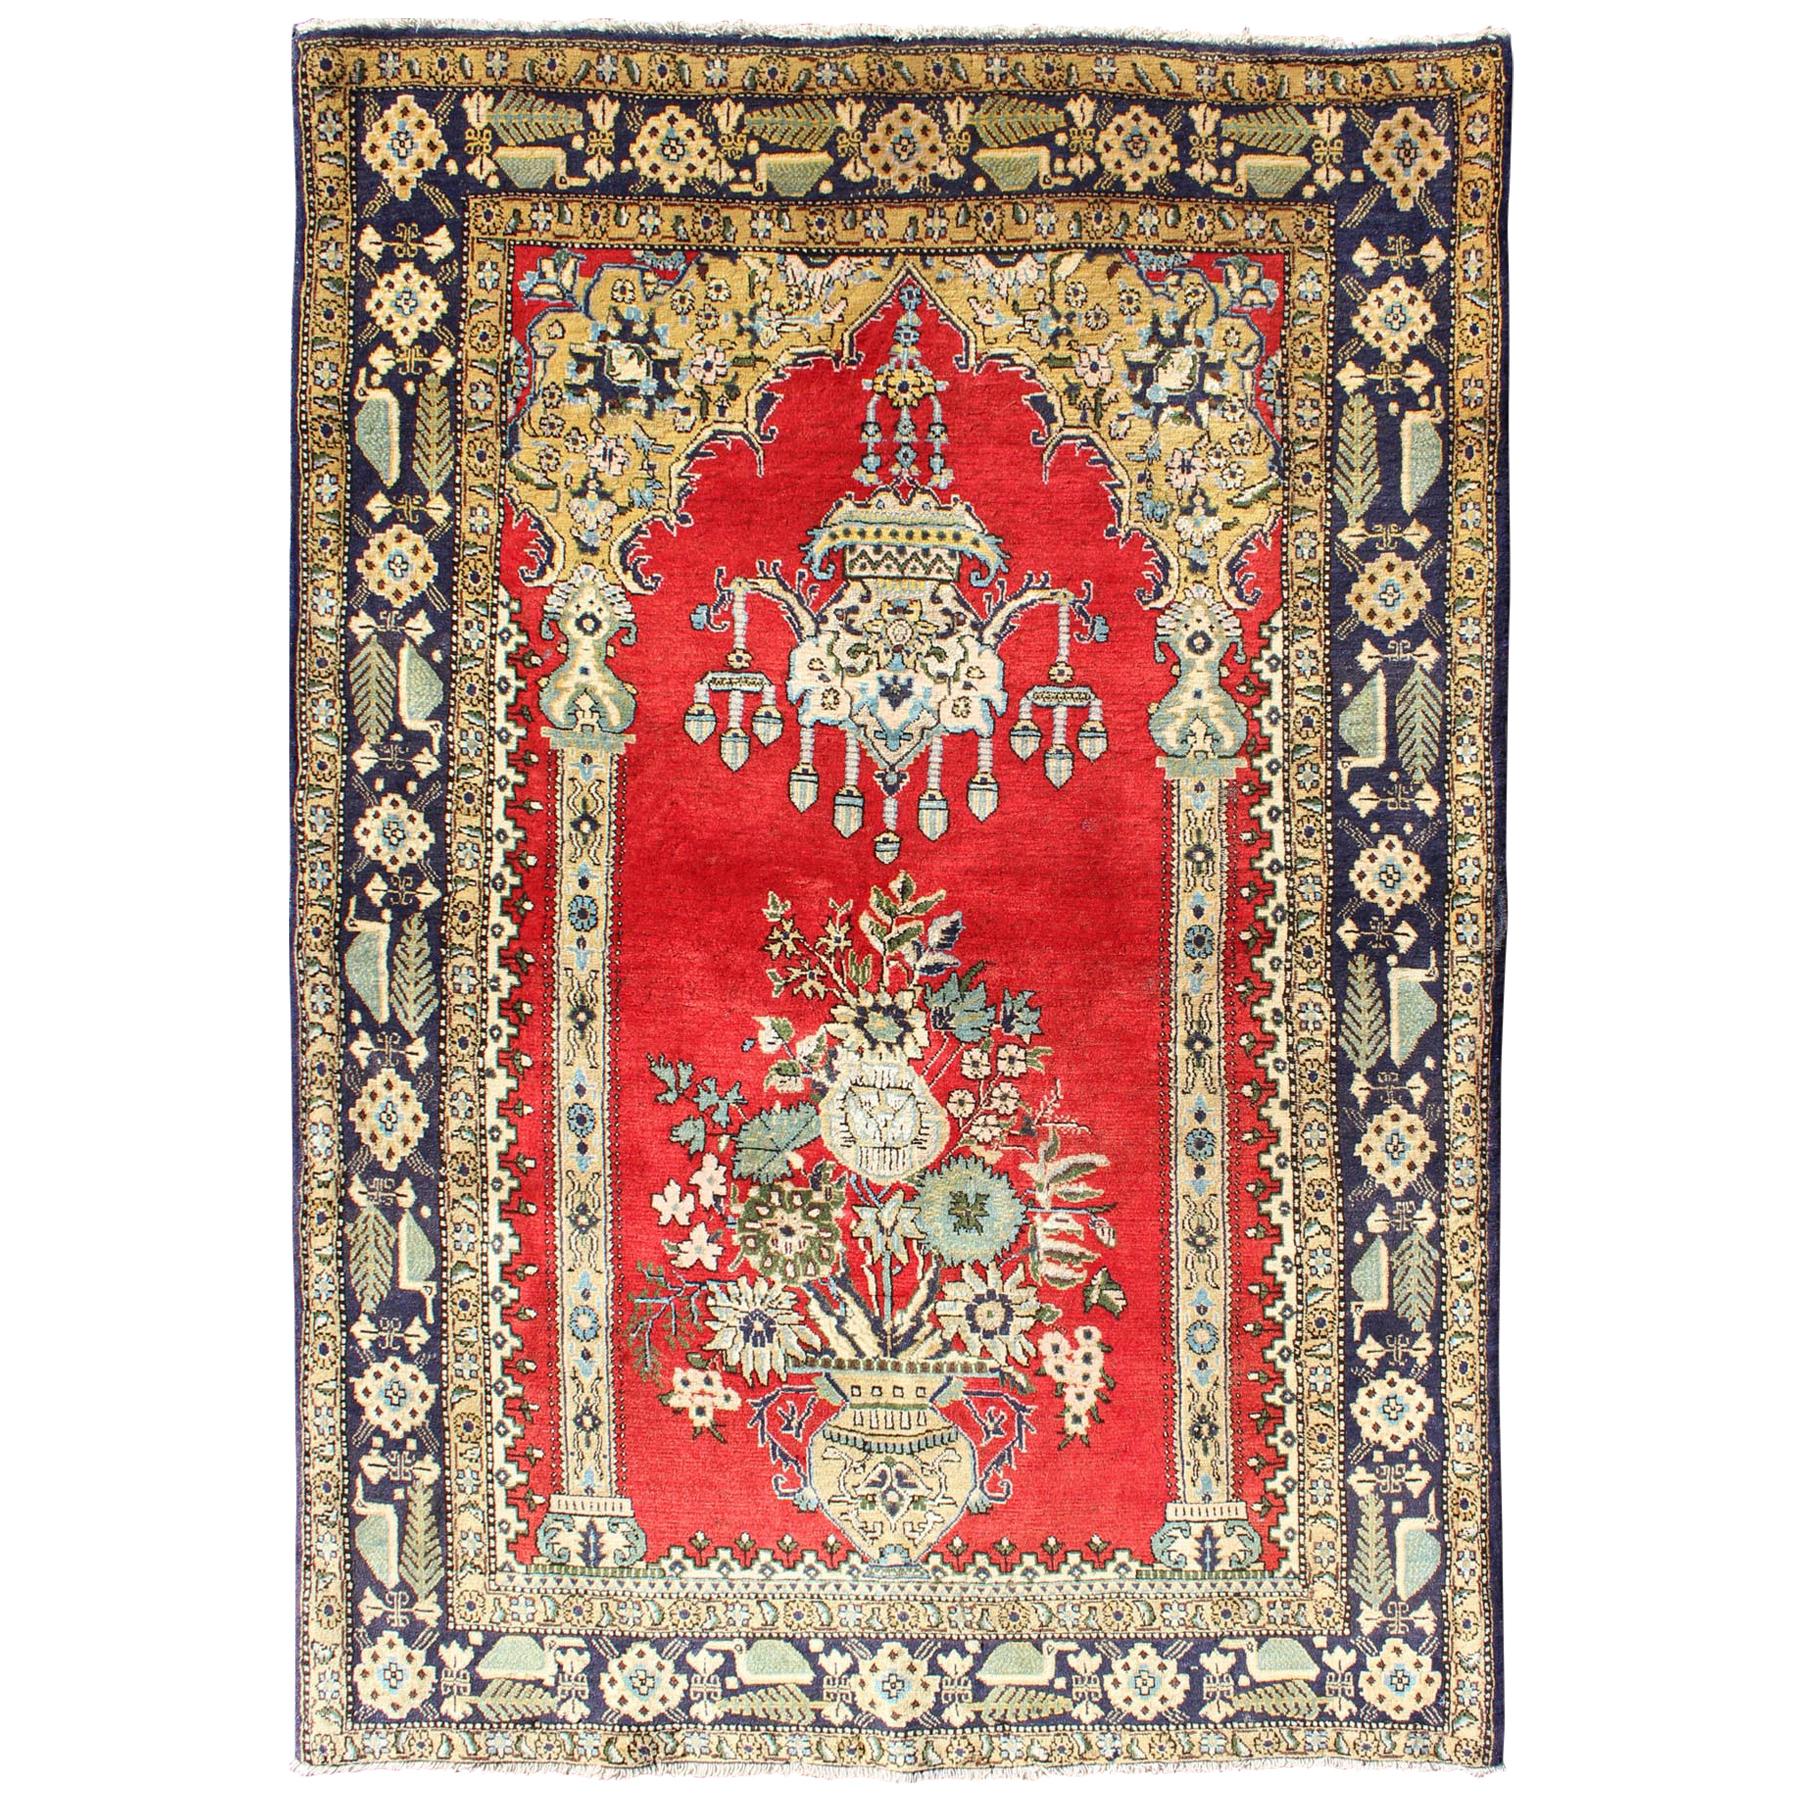 Vintage Persian Qum Prayer Rug in Bright Red with Floral Bouquet Chandelier